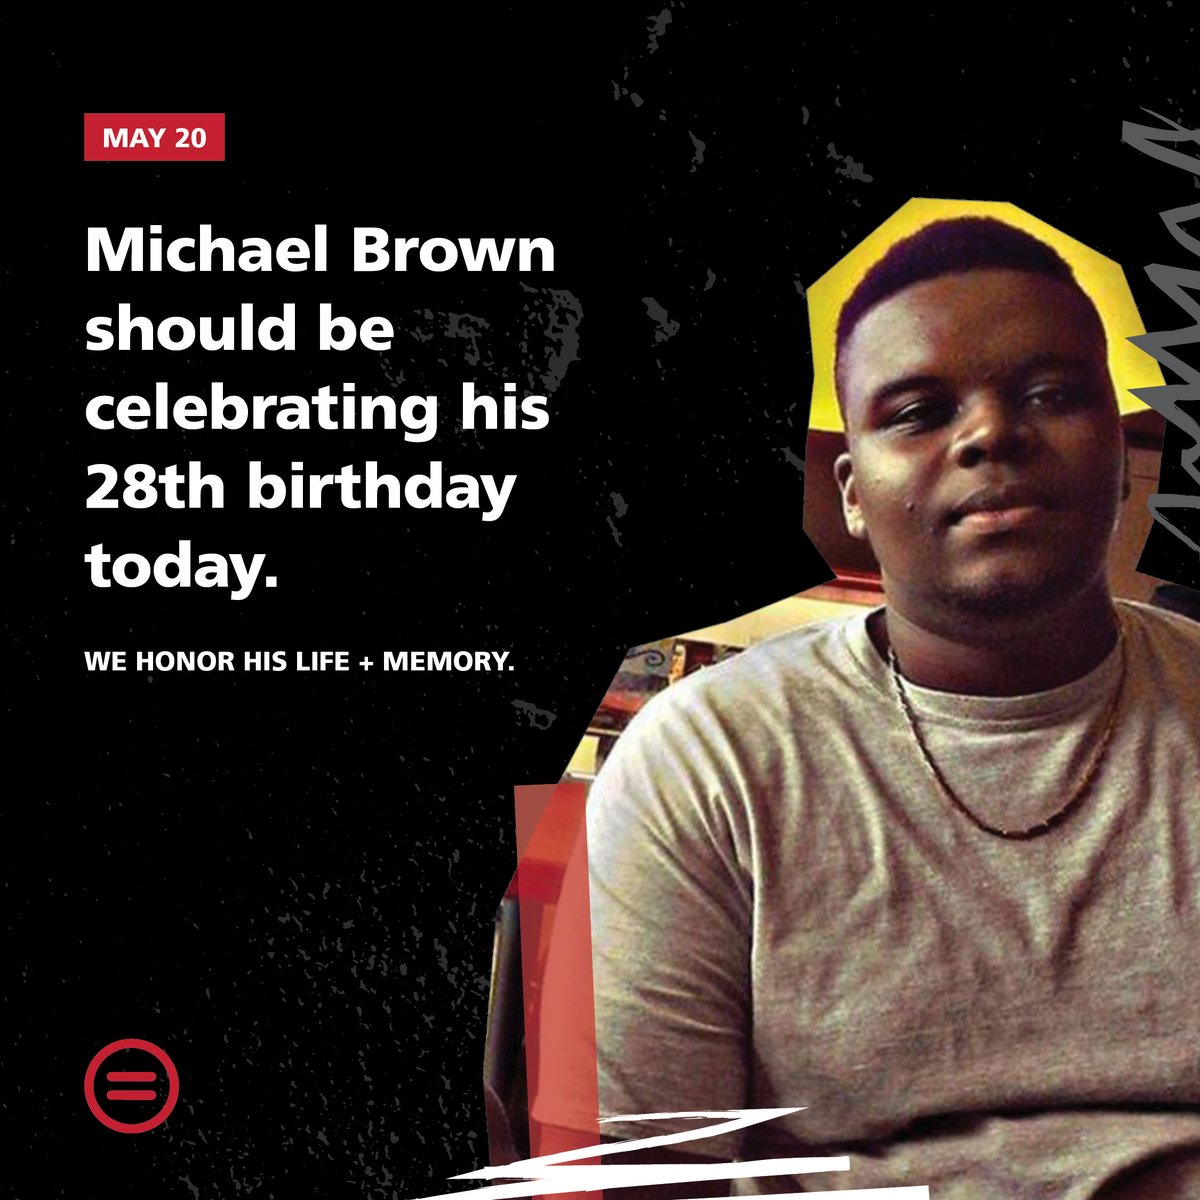 Our hearts are with #MichaelBrown's family and loved ones on his 28th birthday. We honor his life and memory by continuing to fight for police accountability and reform. #BlackLivesMatter